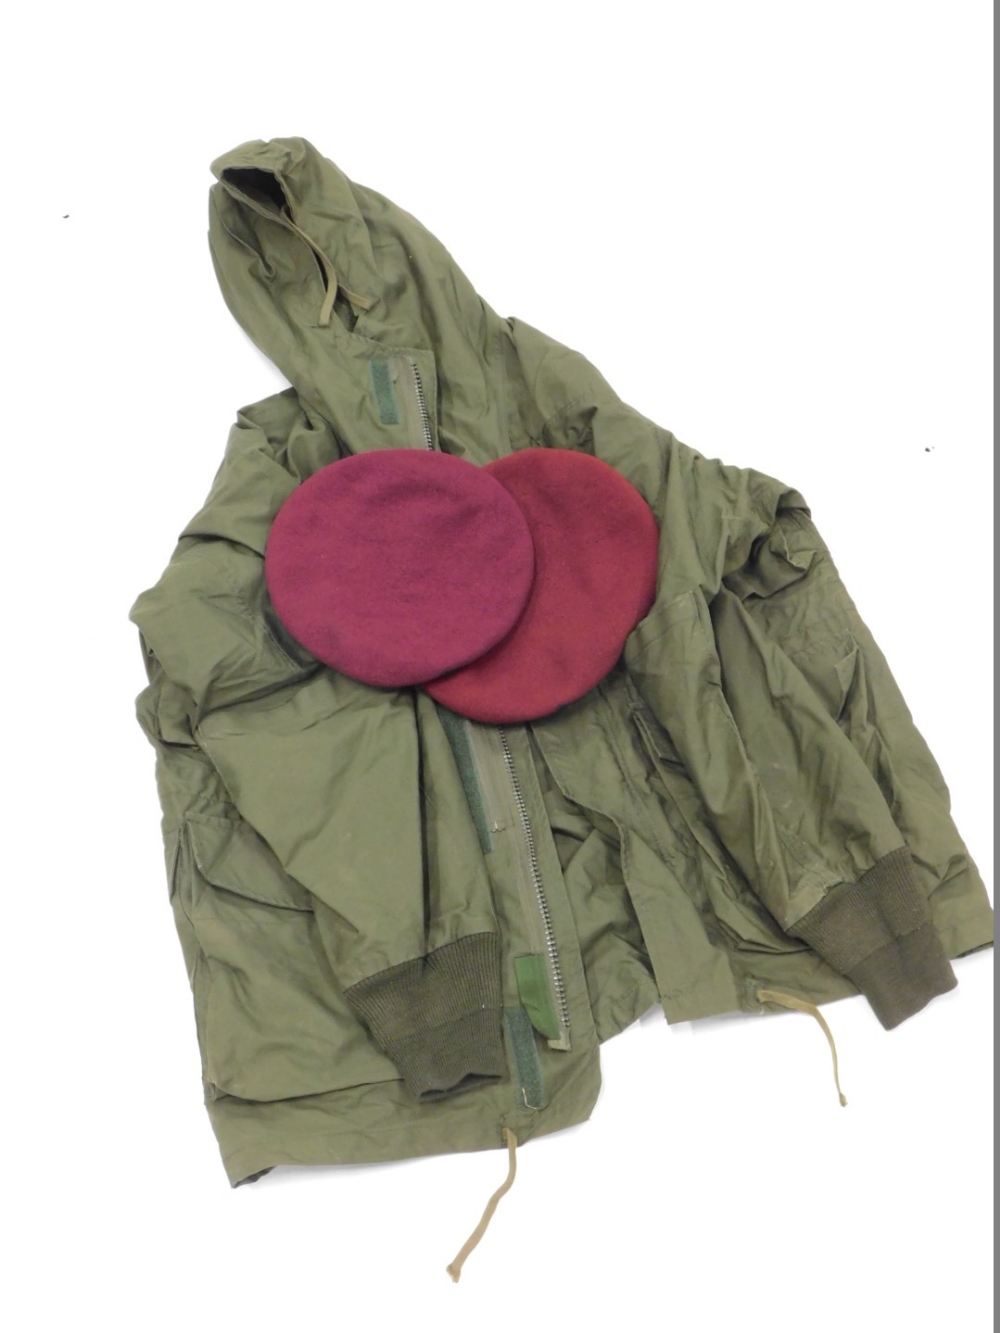 A special Air-Services green jacket, two SAS berets, sizes 6 and 5/8 and 6 and 7/8, labels for 1944